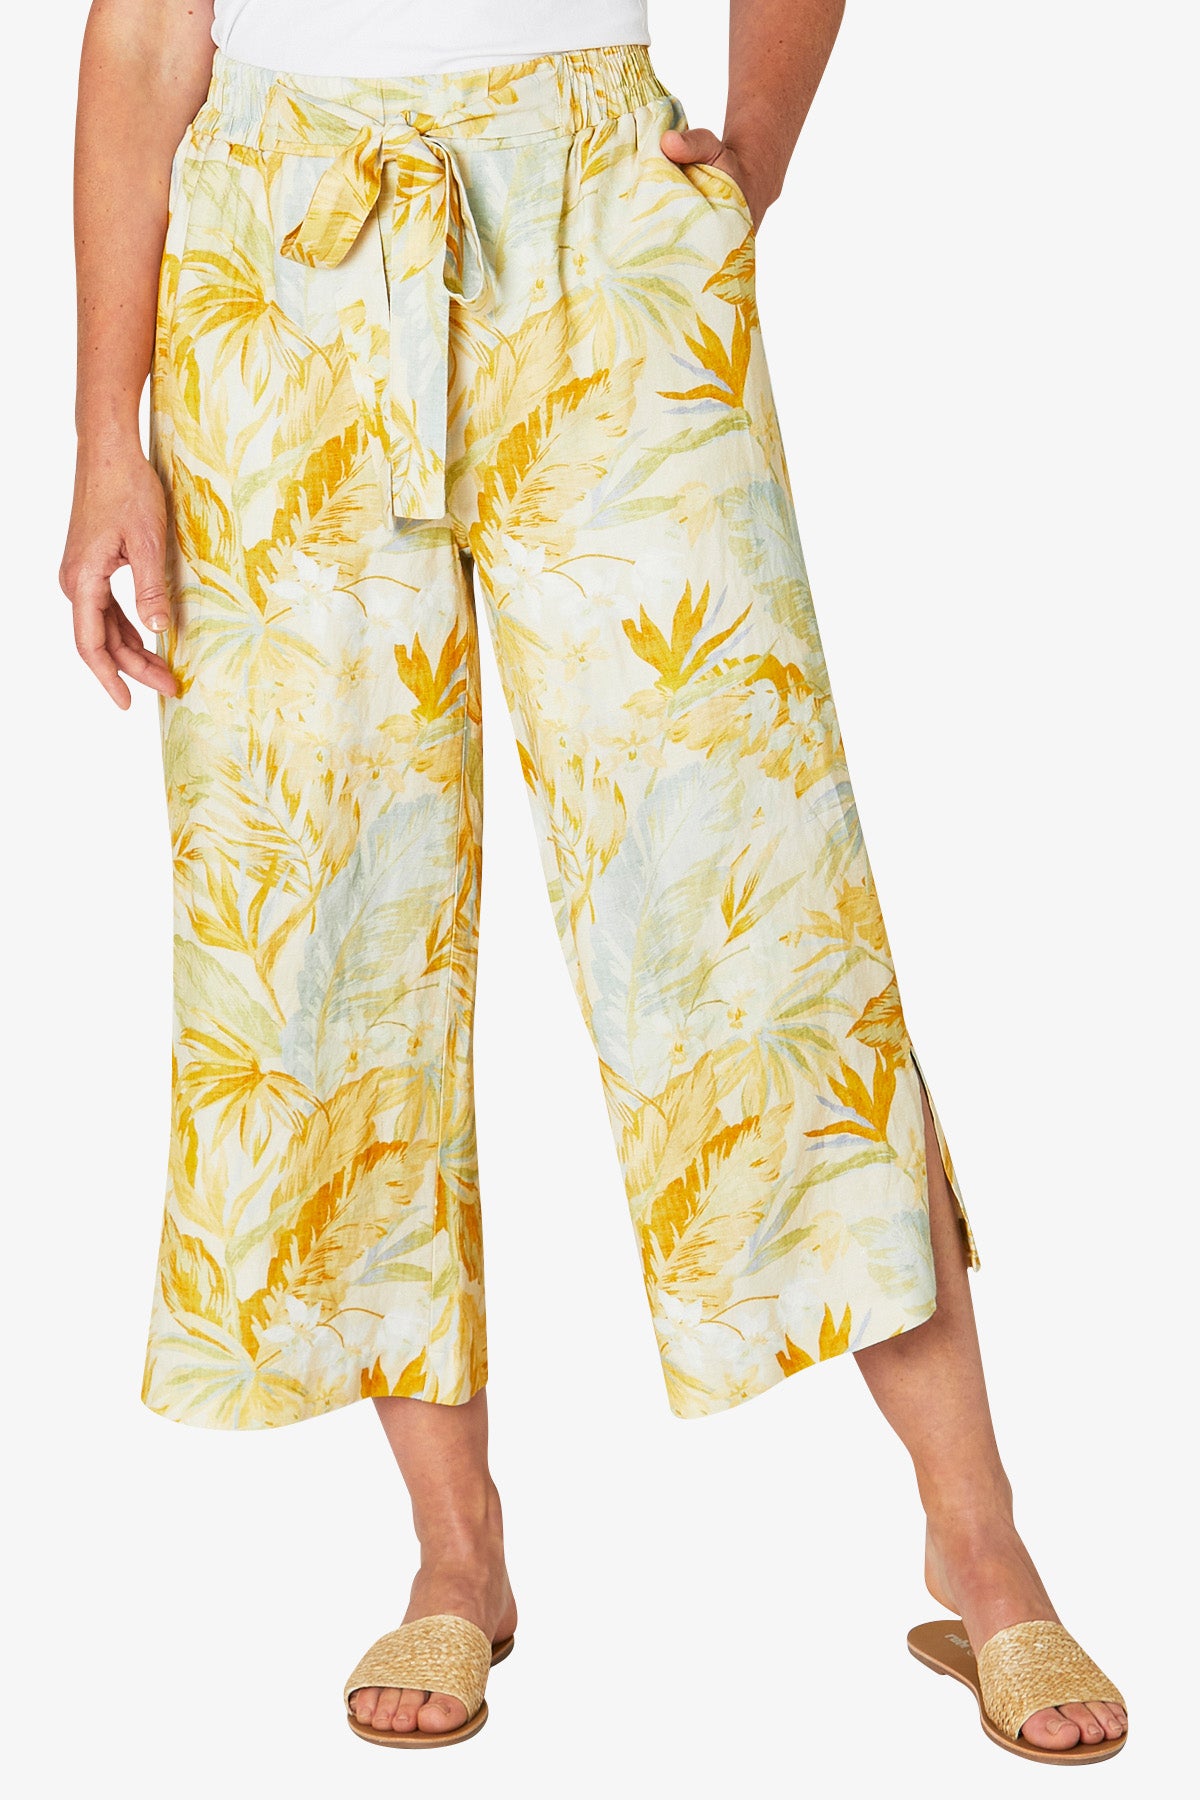 Ethereal Print Culottes White and Yellow